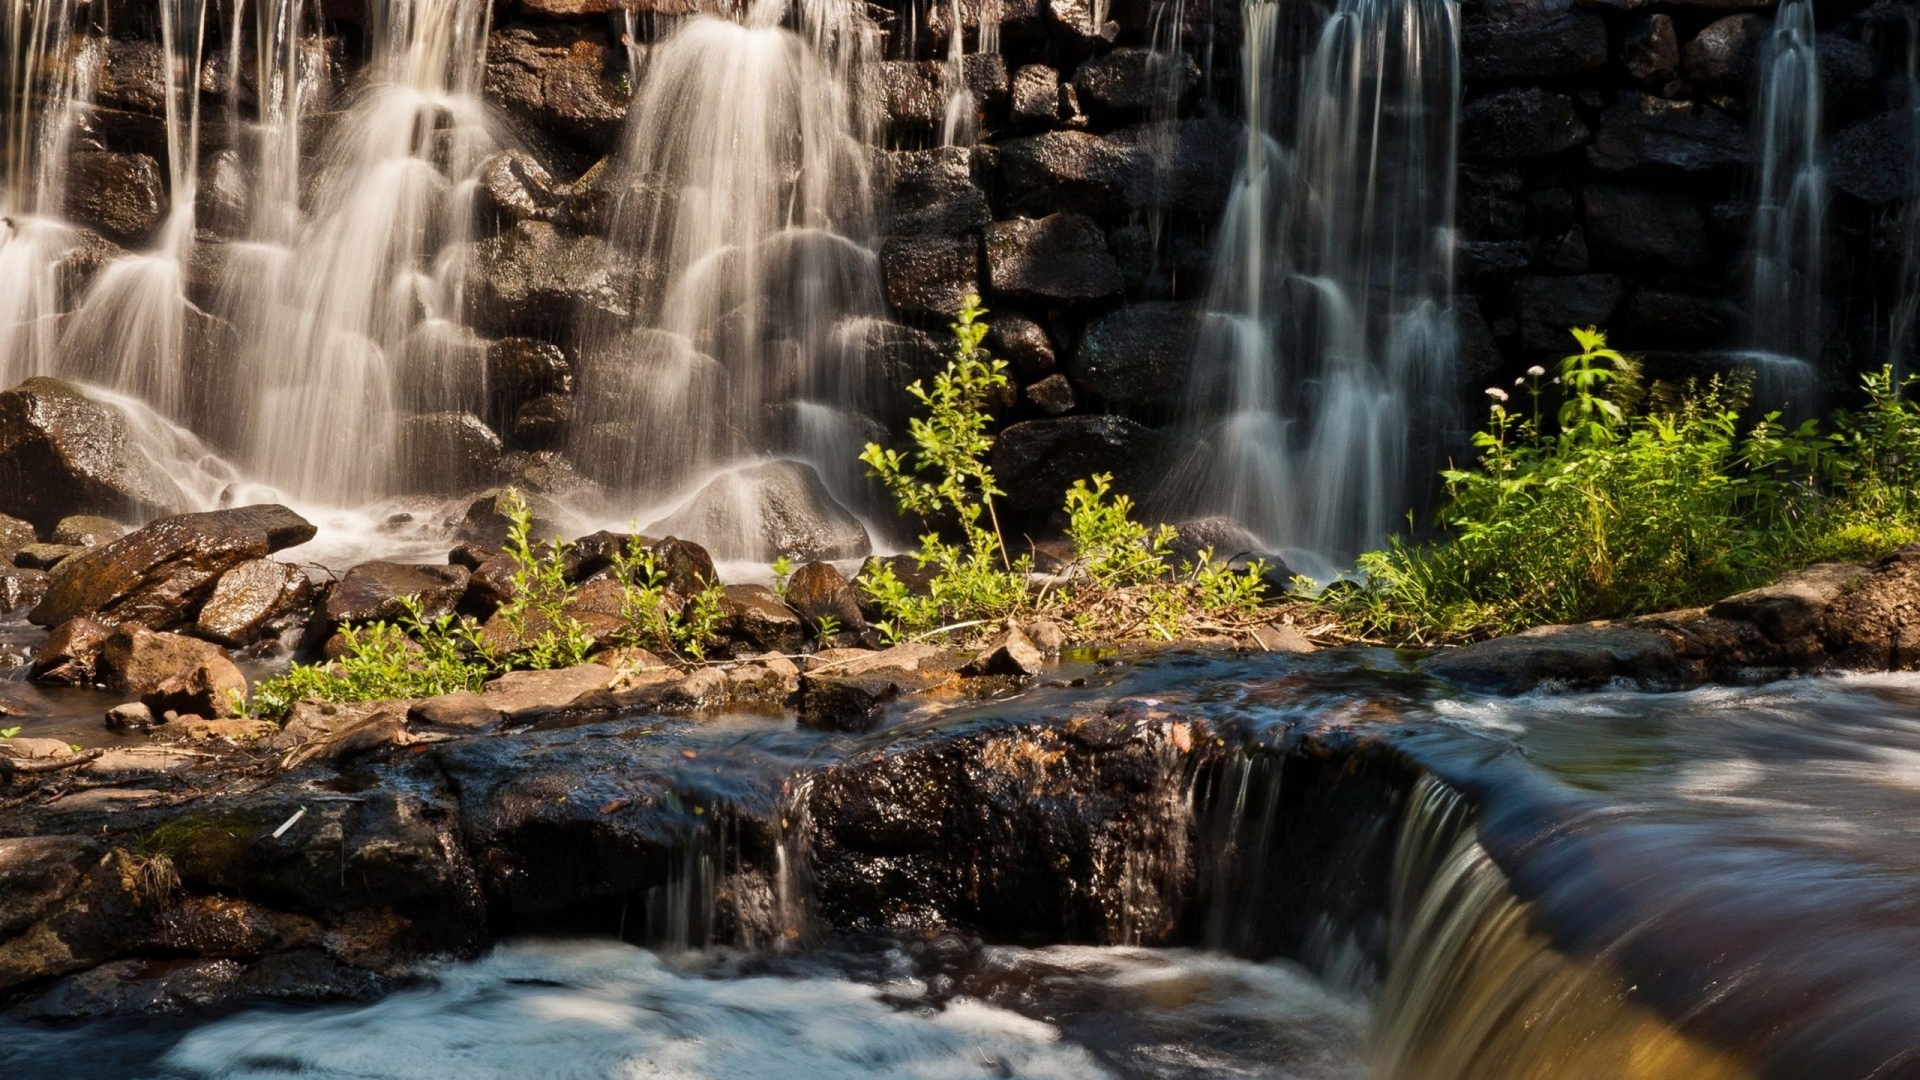 Download 1920×1080 Waterfall Foam River Mountains Full - Themes Downlod , HD Wallpaper & Backgrounds